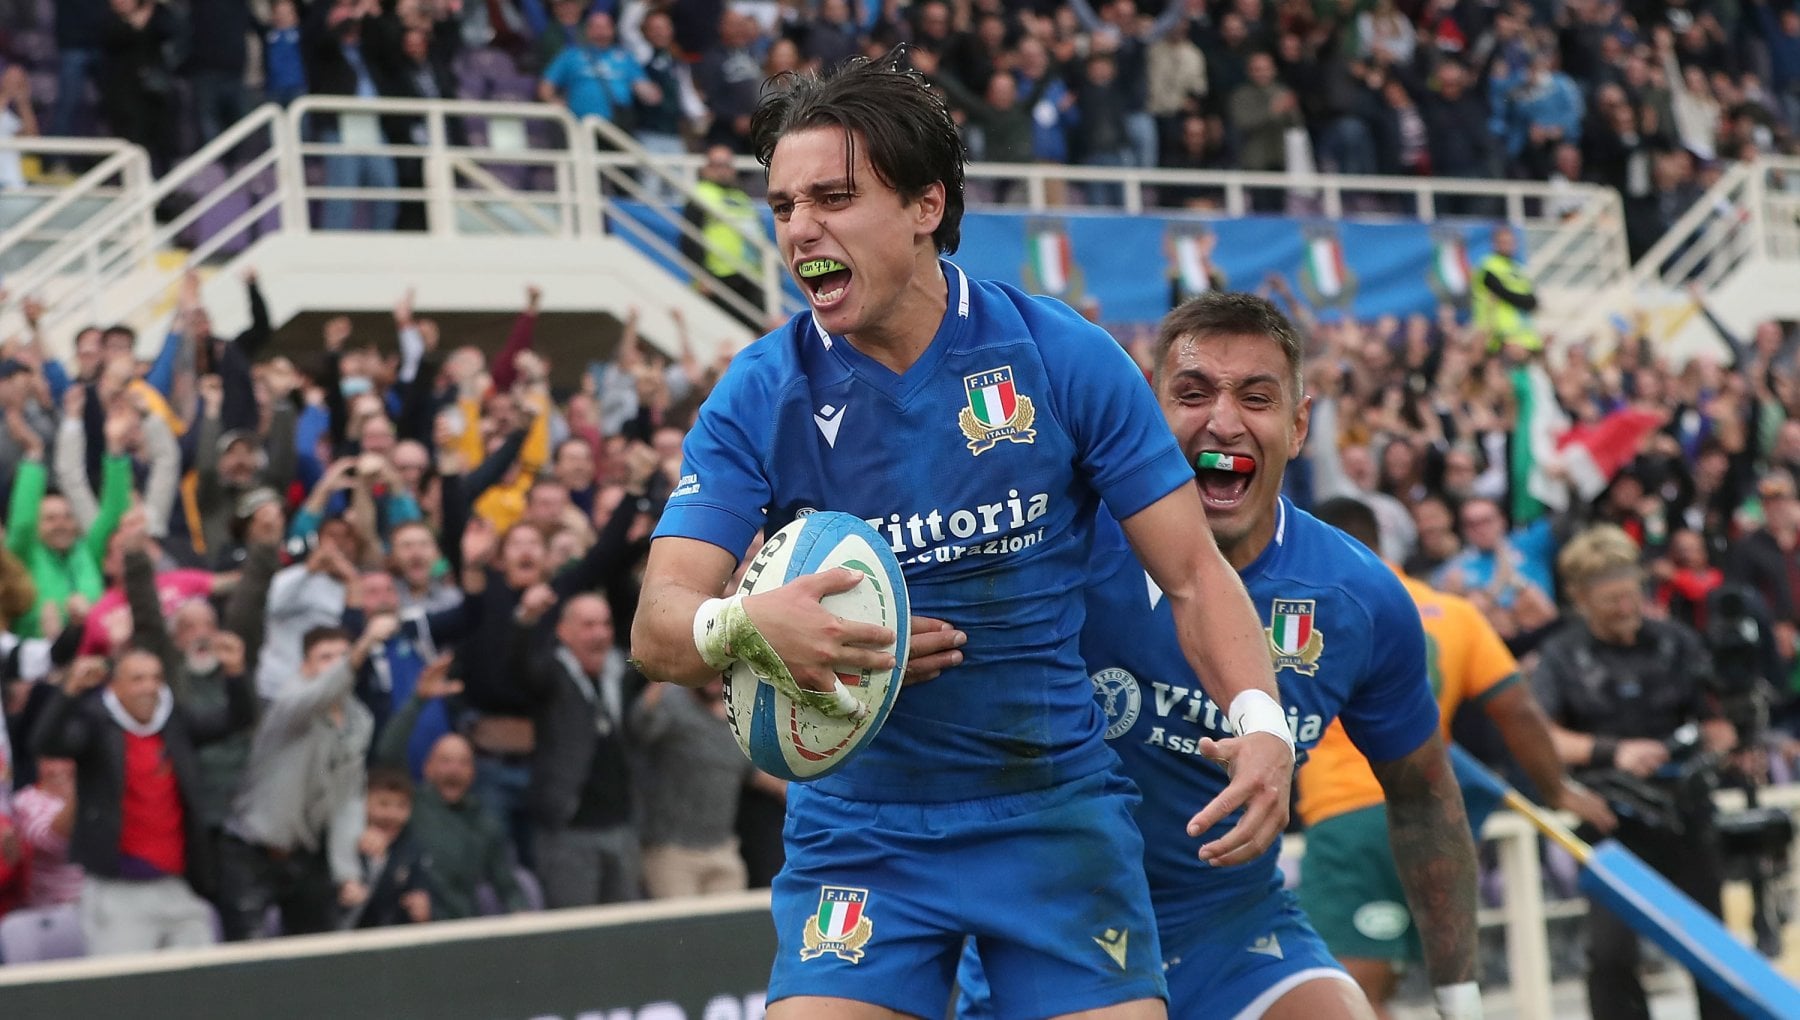 Rugby's Italy and compliments of the oval world

